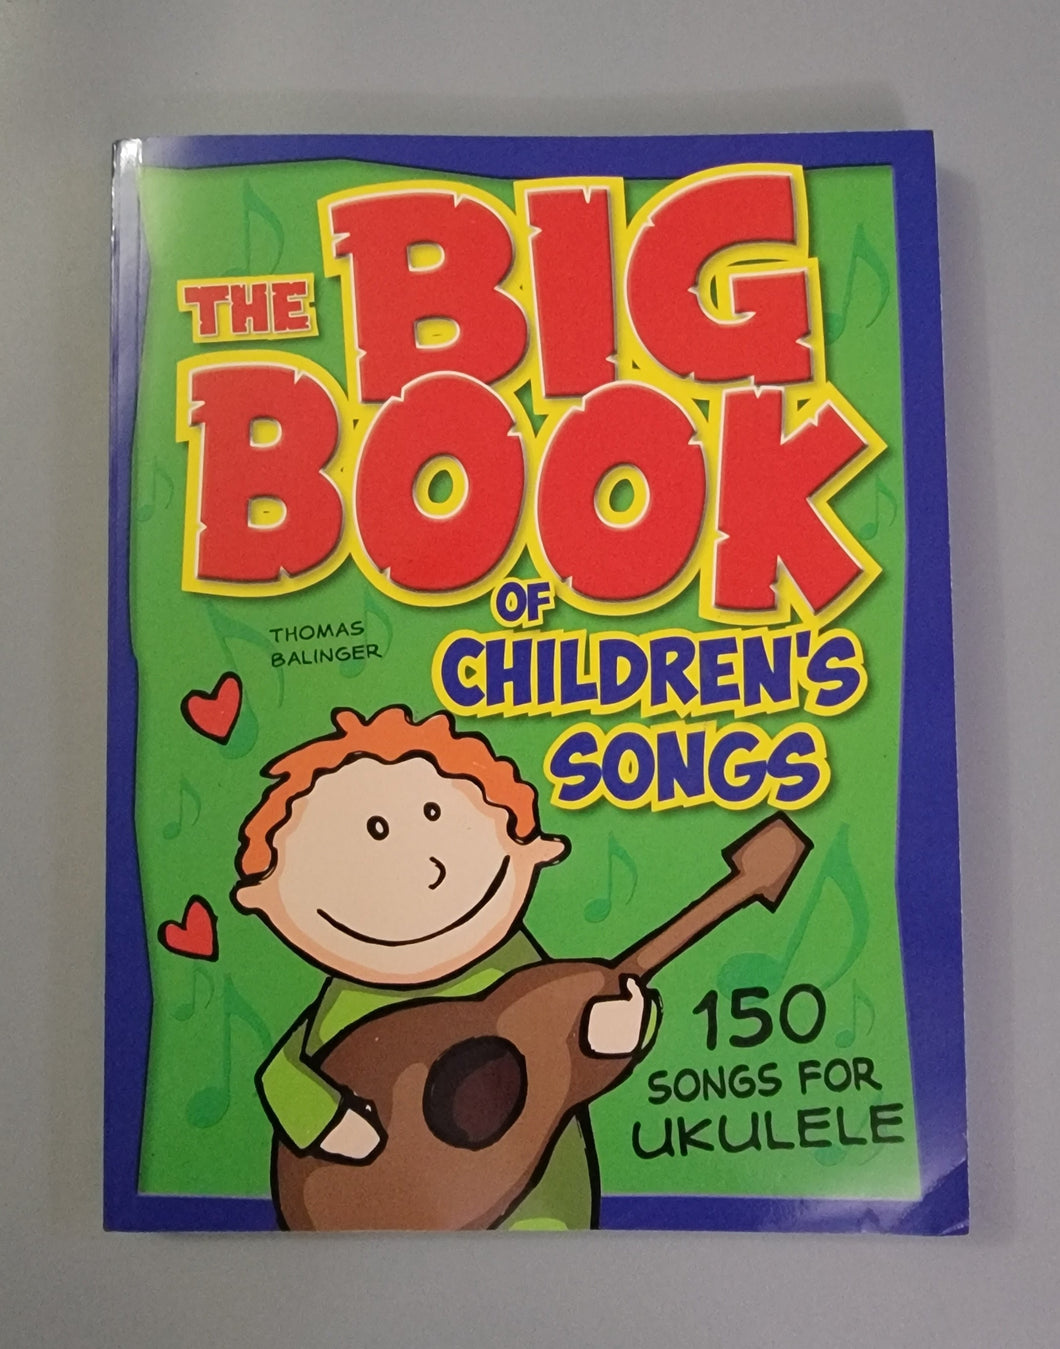 The Big Book of Children's Songs for Ukulele Paperback – January 31, 2016